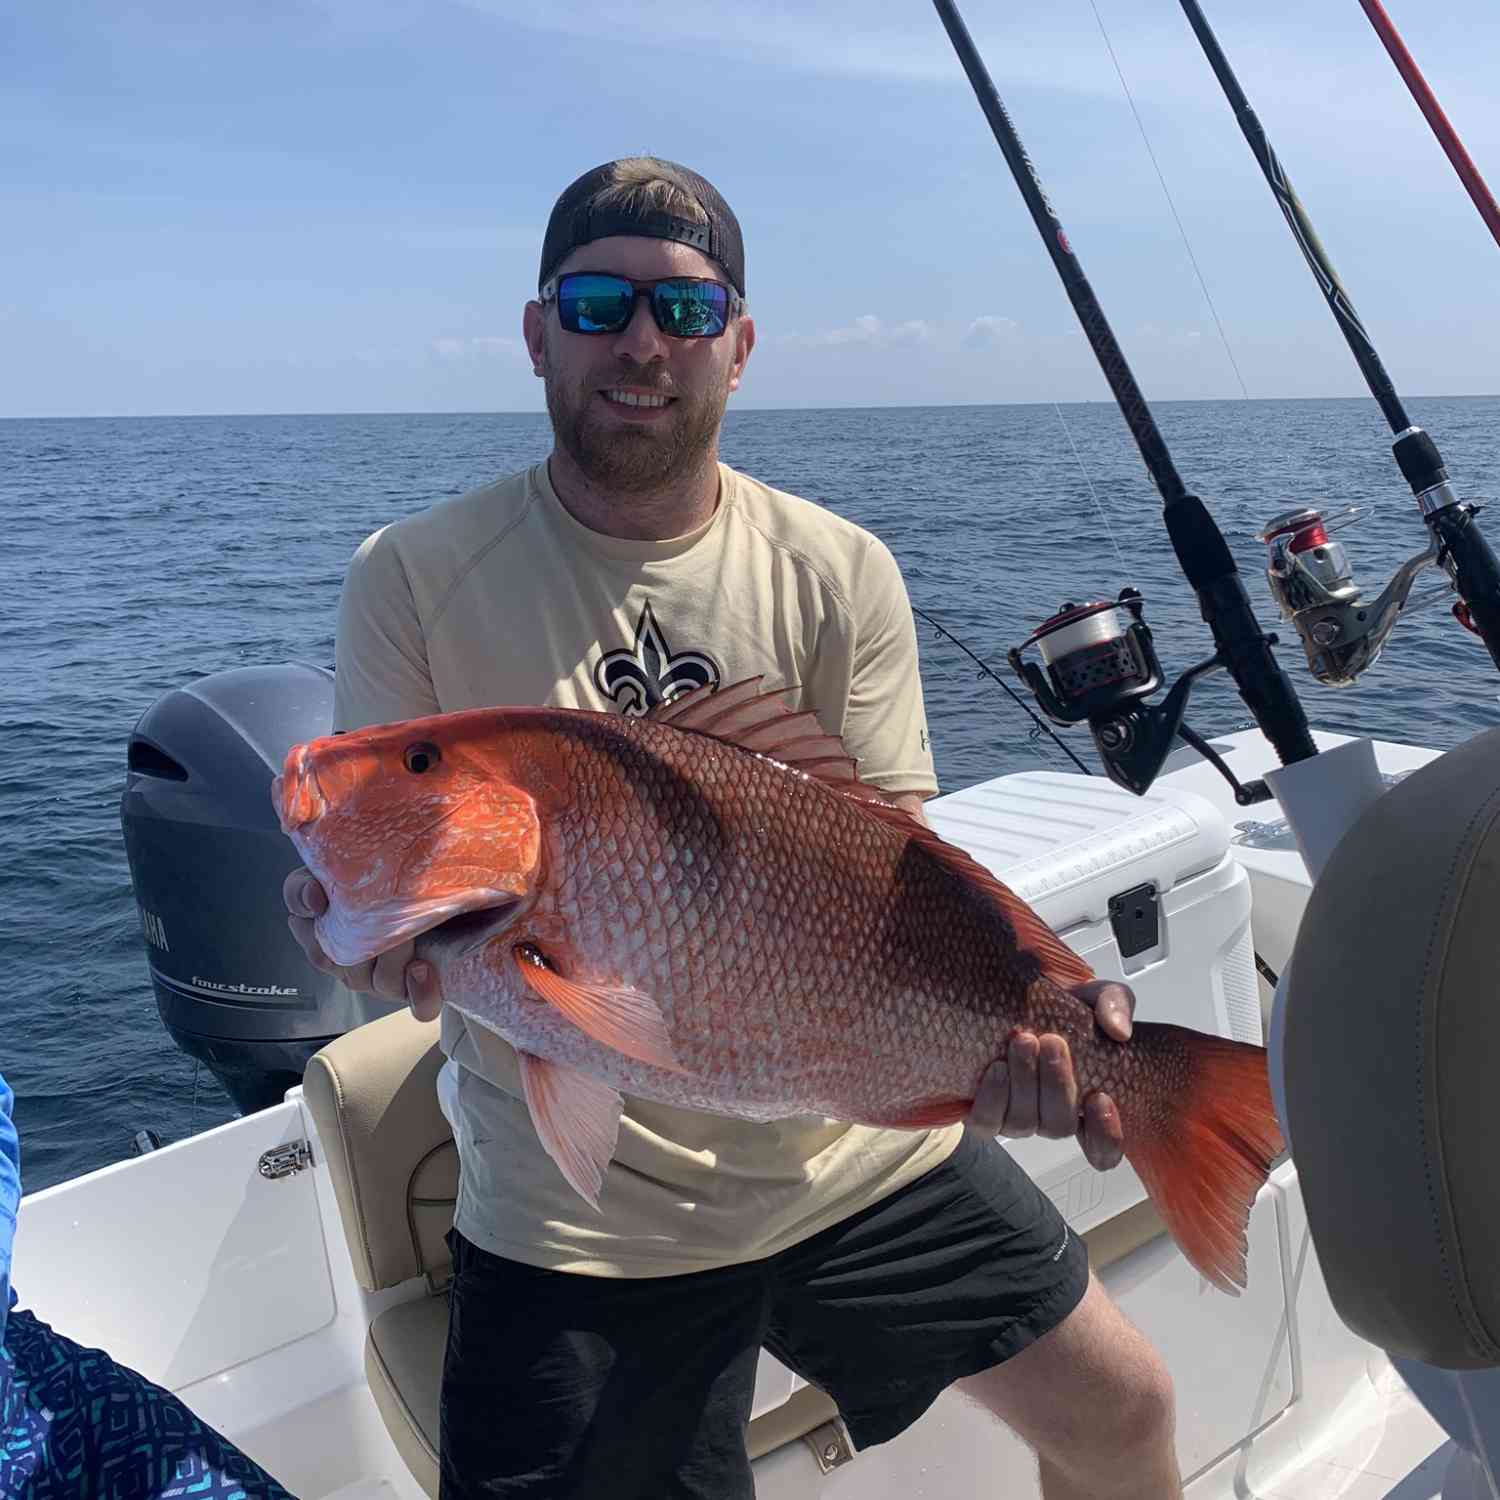 Had a decent day and on our last cast pulled up this big red snapper. We stayed for a few...